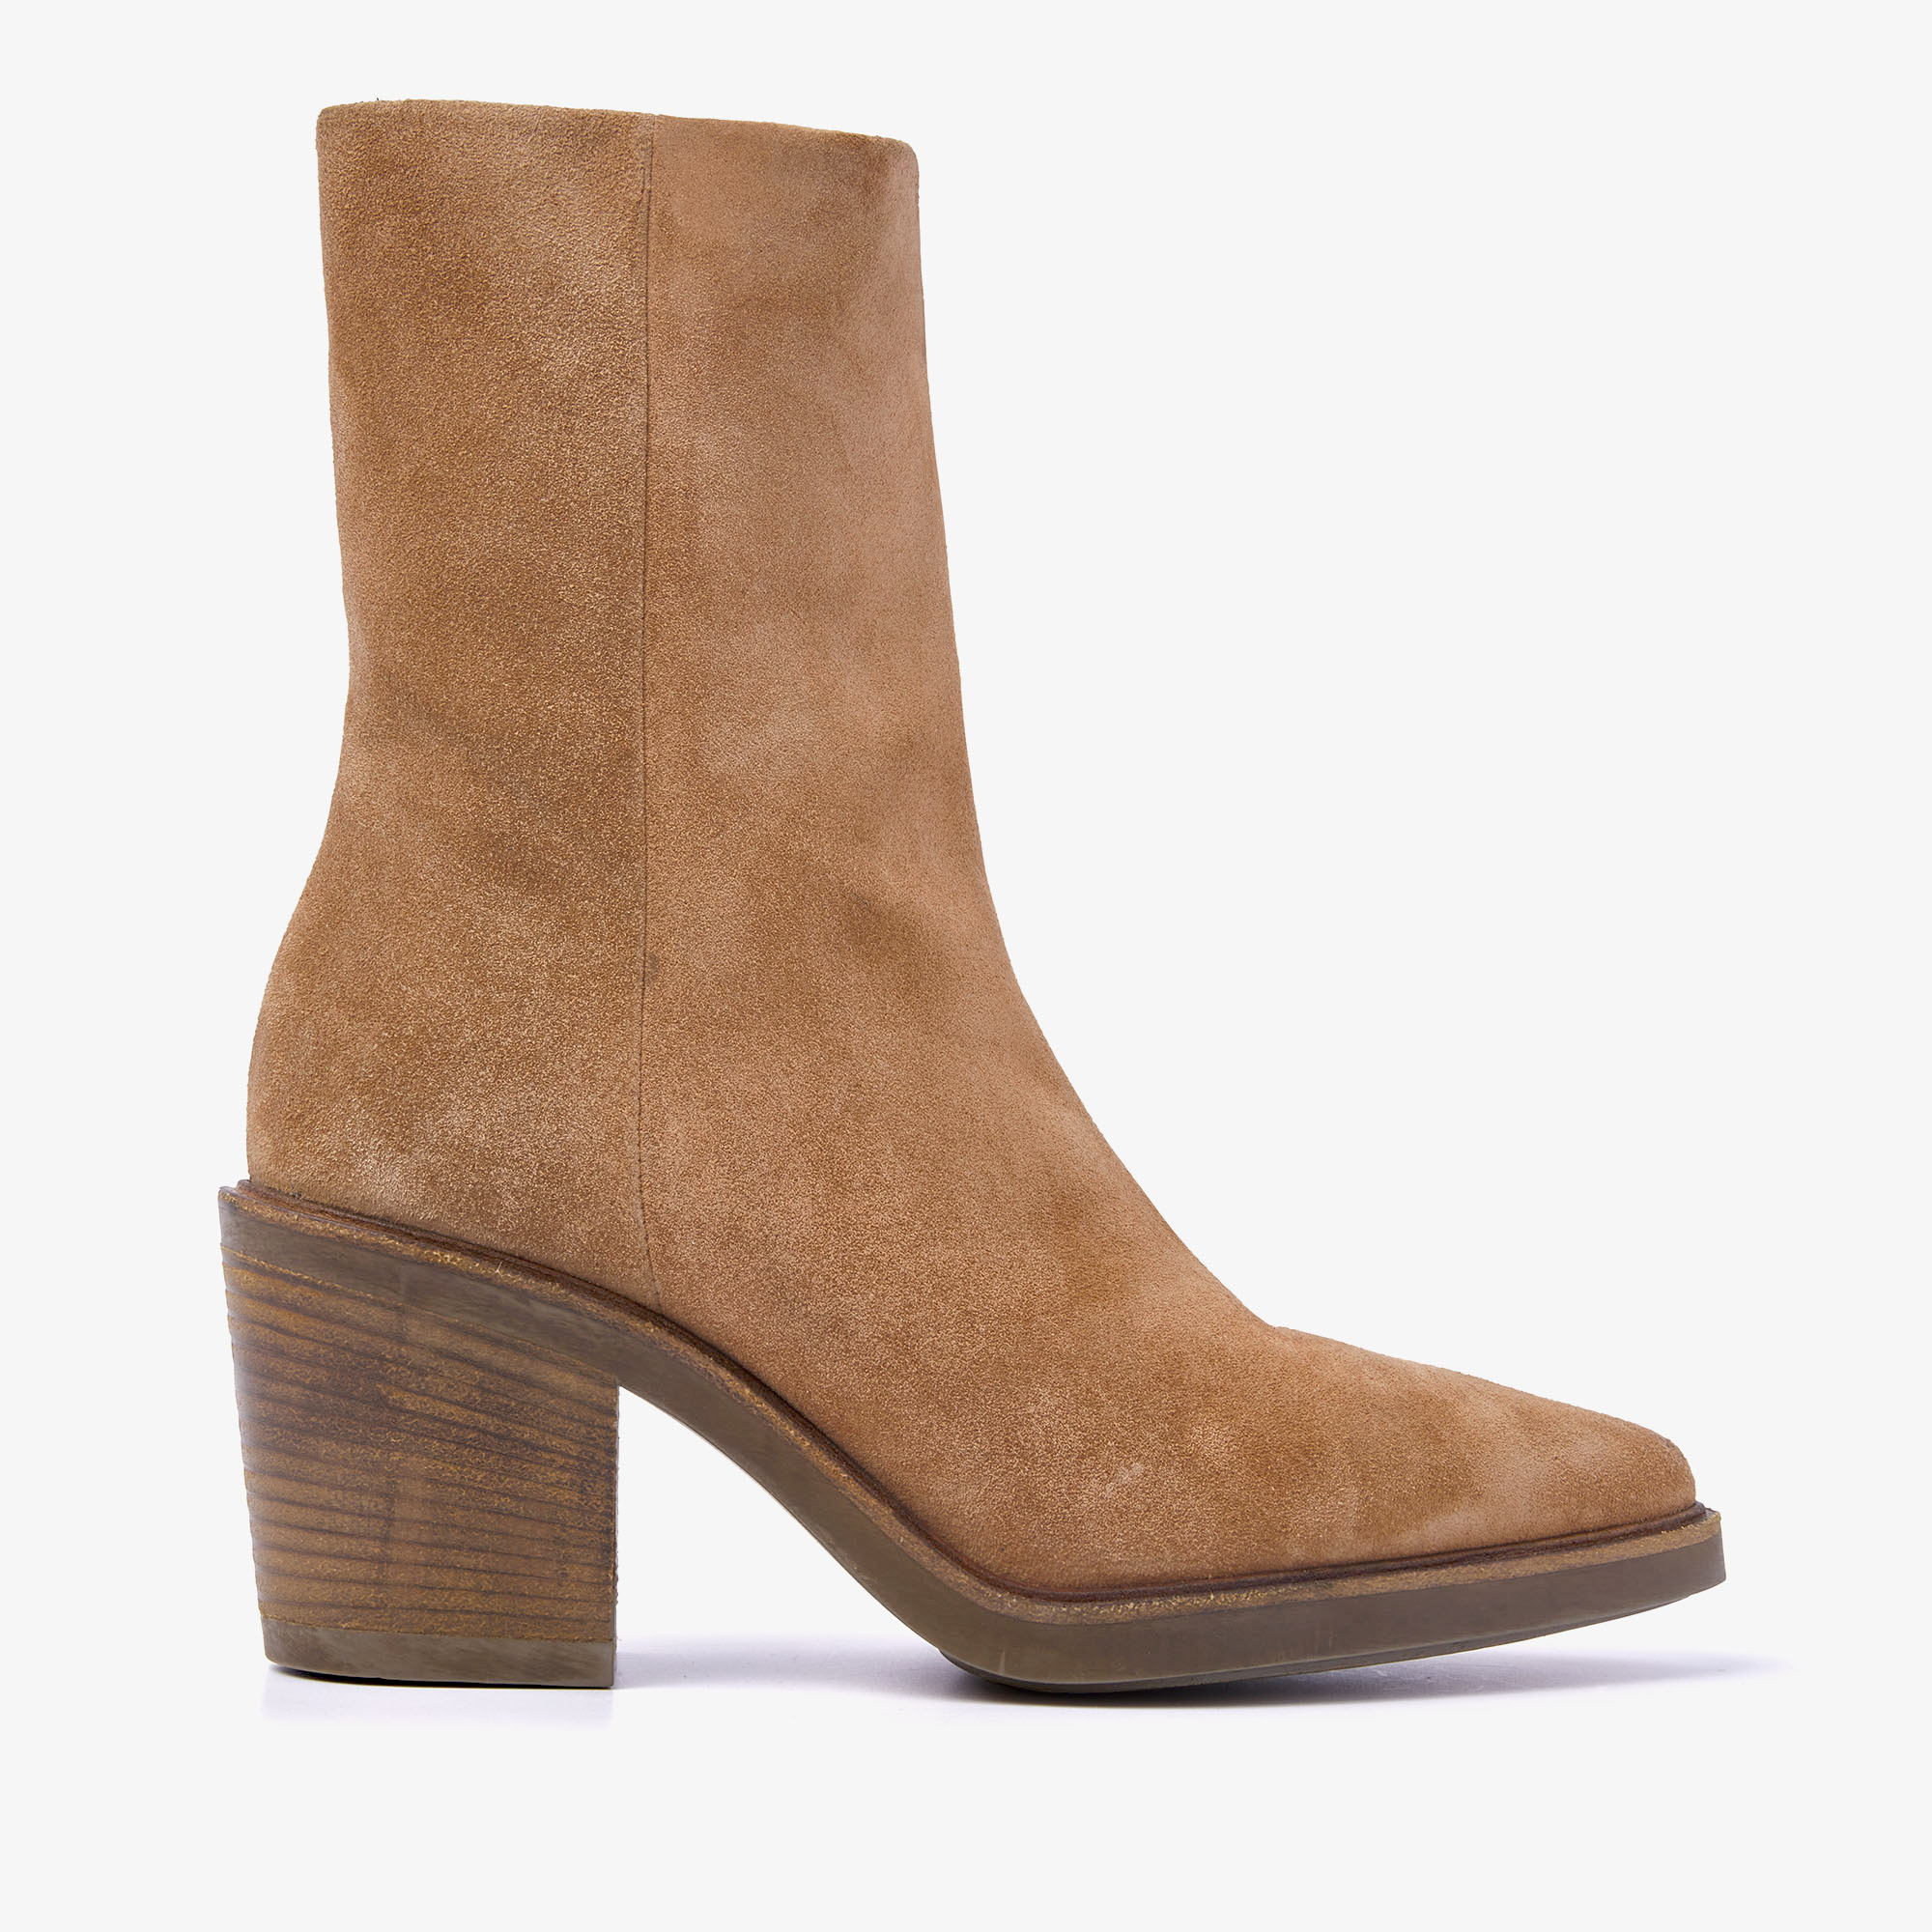 VIA VAI Kailee Faye cognac ankle boots